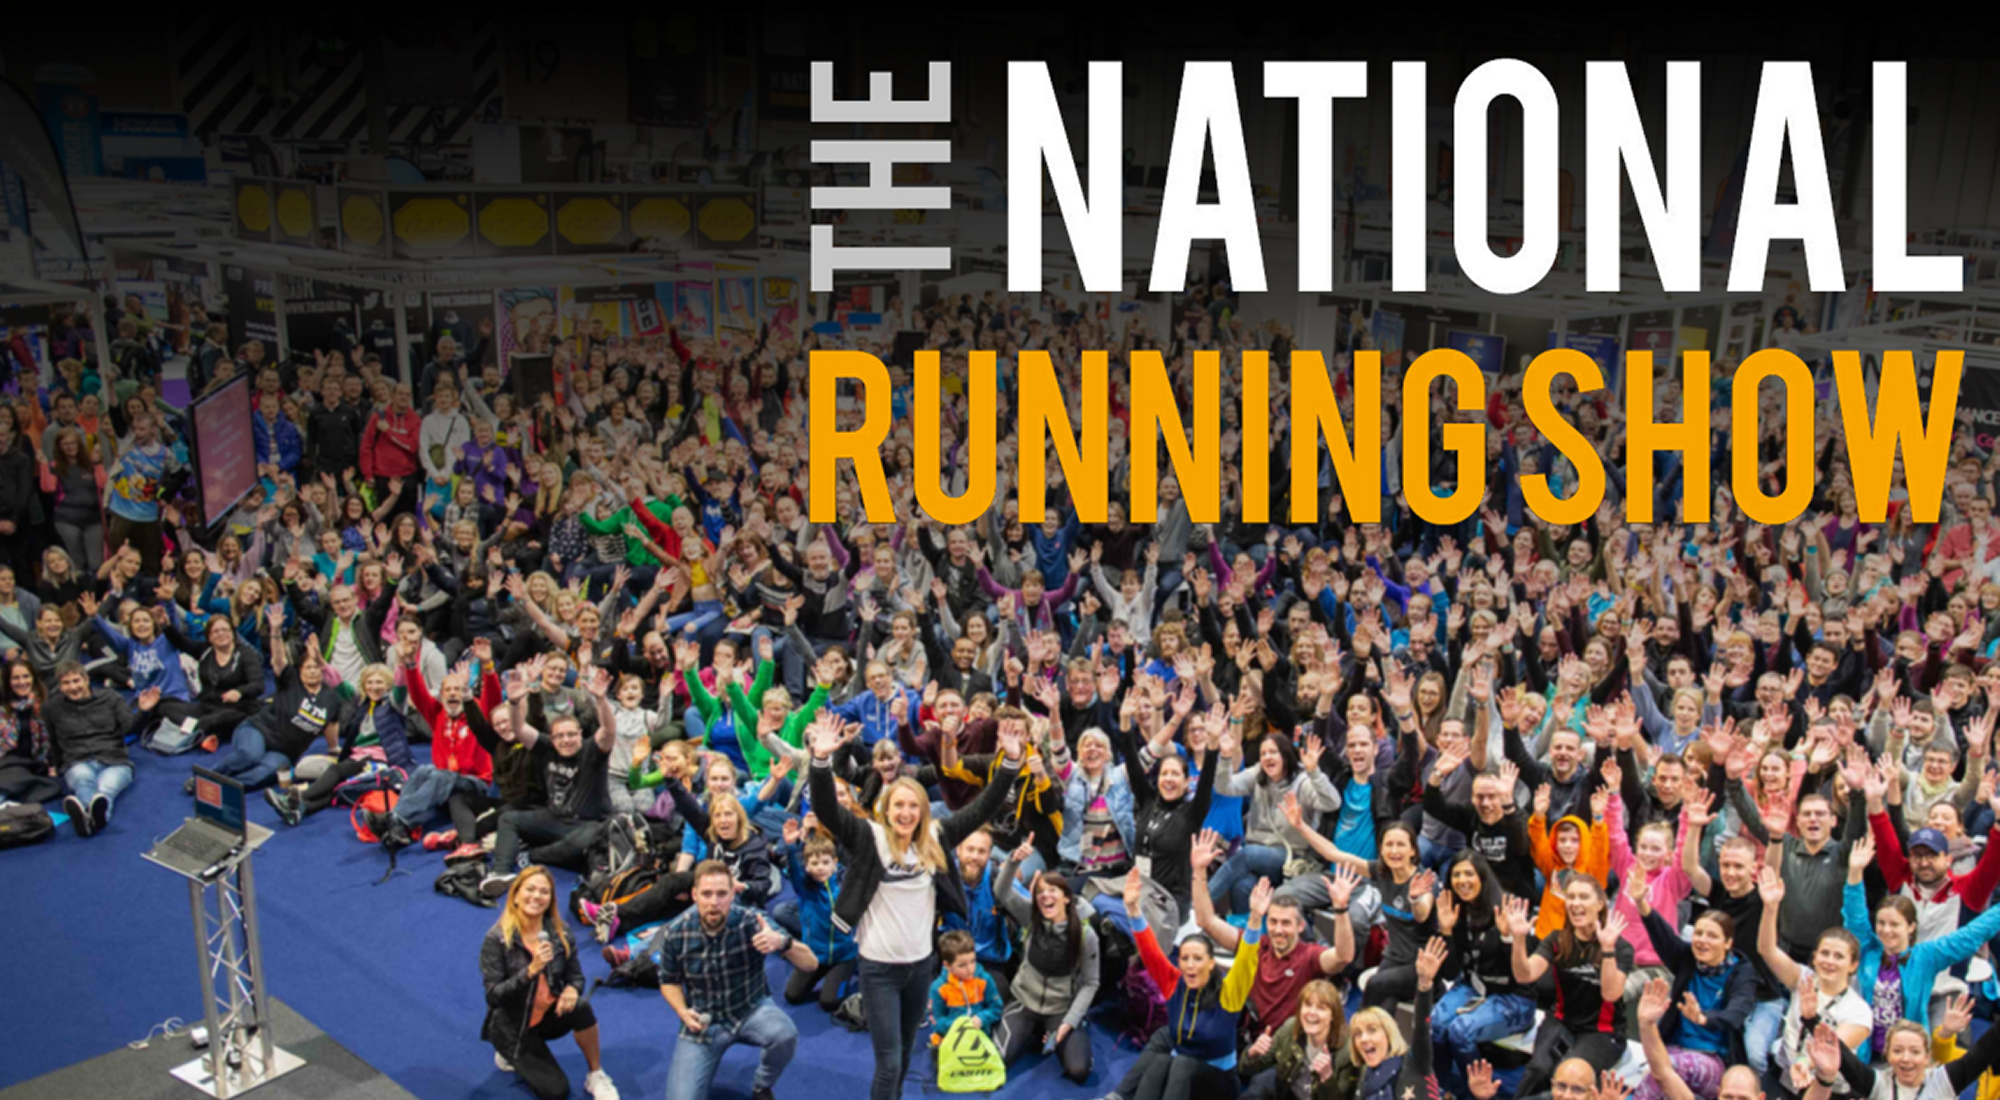 The National Running Show 2020 